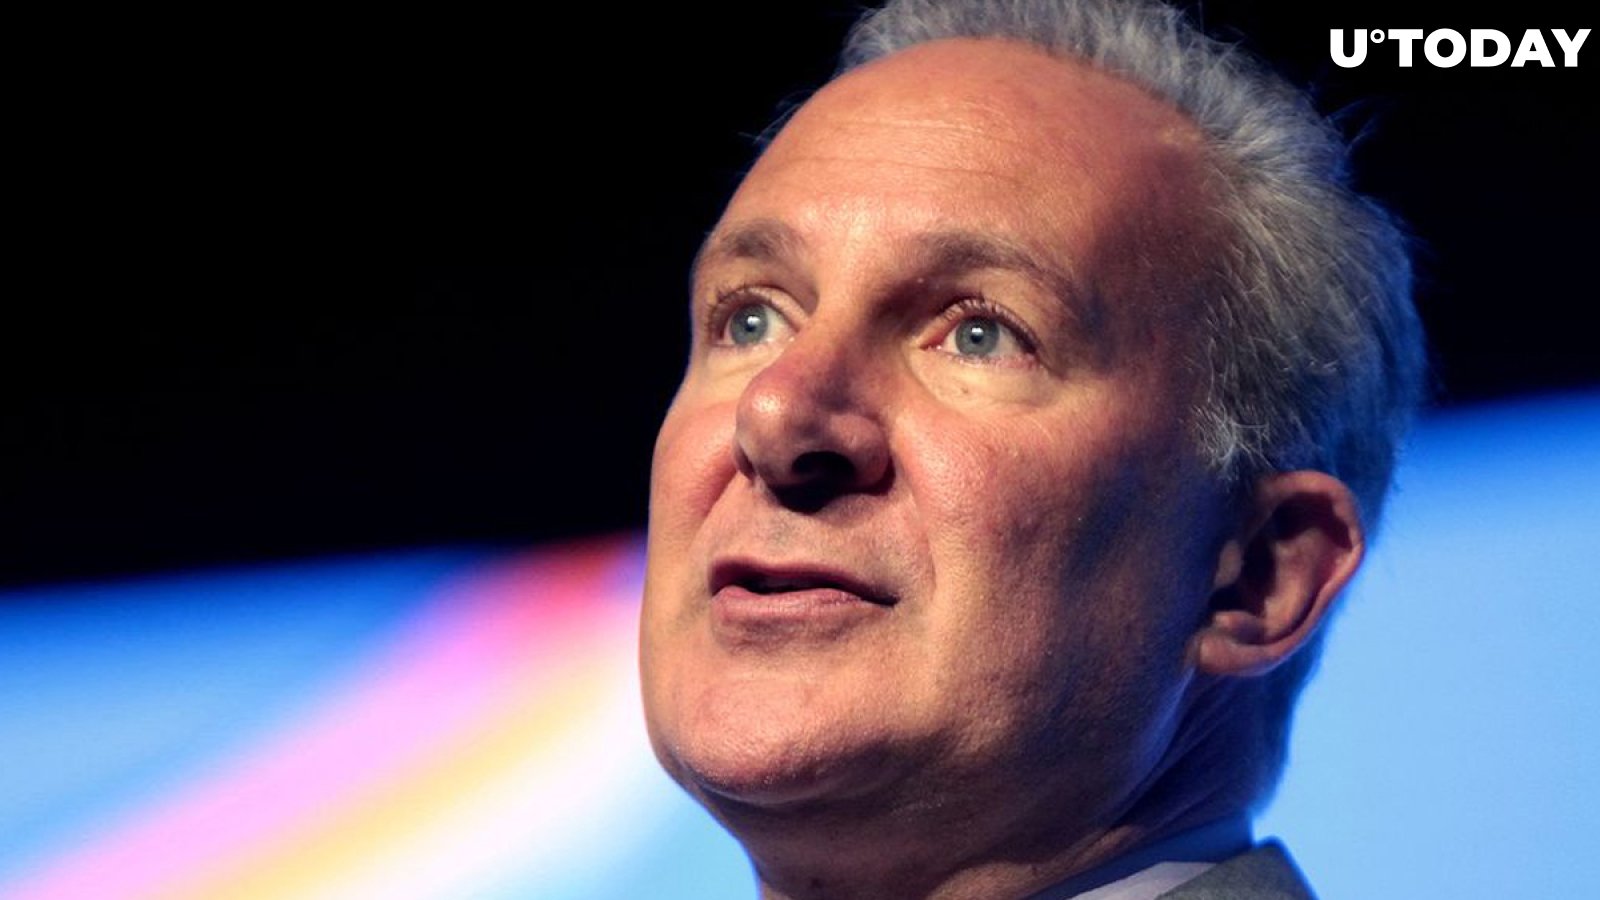 Bitcoin Price Has Fallen 53% Priced in Gold since June 2019 – HODLers Remain Delusional: Peter Schiff